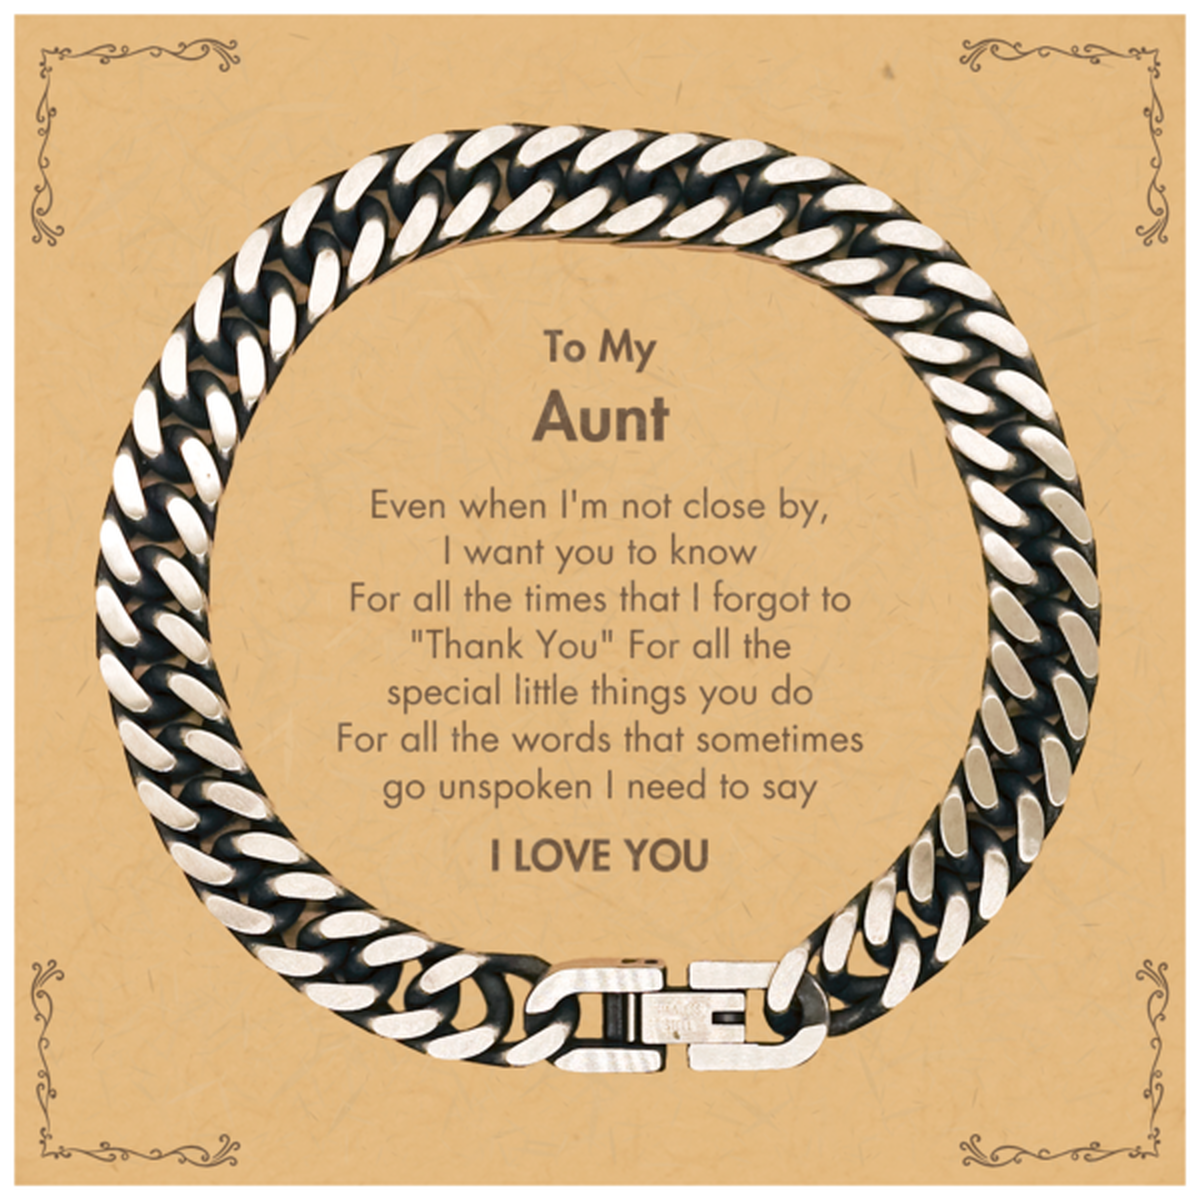 Thank You Gifts for Aunt, Keepsake Cuban Link Chain Bracelet Gifts for Aunt Birthday Mother's day Father's Day Aunt For all the words That sometimes go unspoken I need to say I LOVE YOU